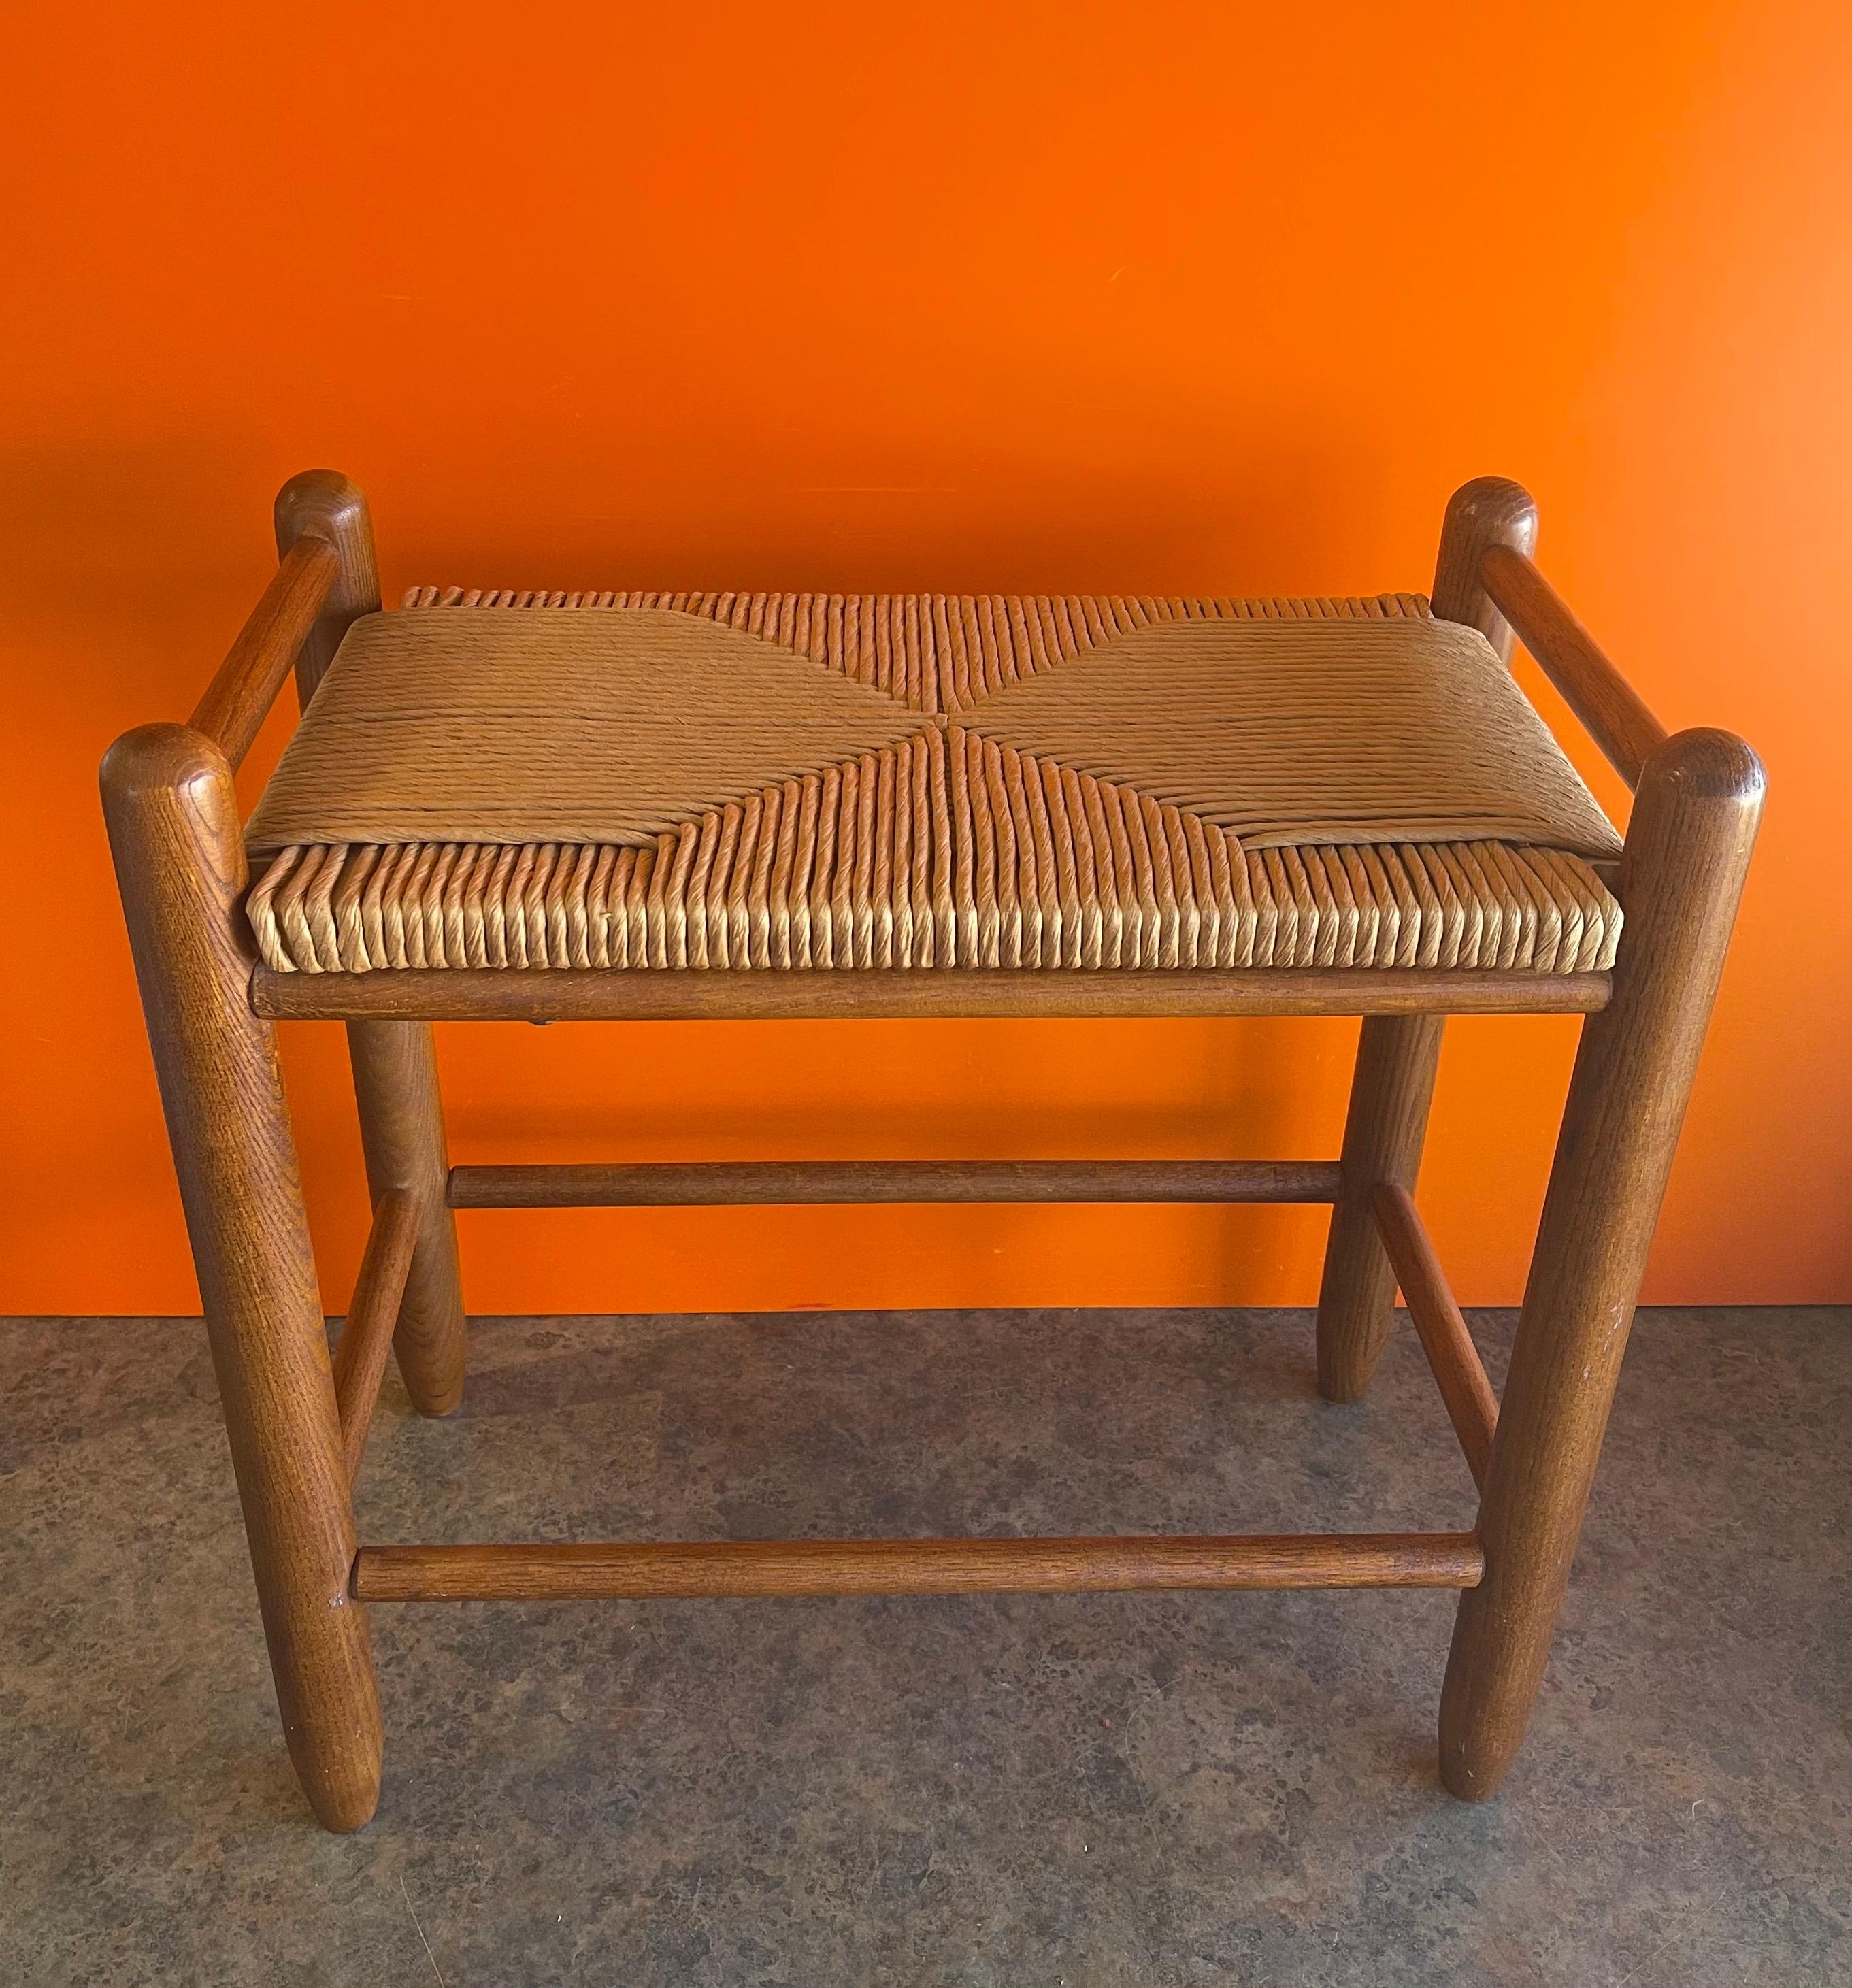 Danish Modern Teak & Paper Cord Stool / Bench In Good Condition For Sale In San Diego, CA